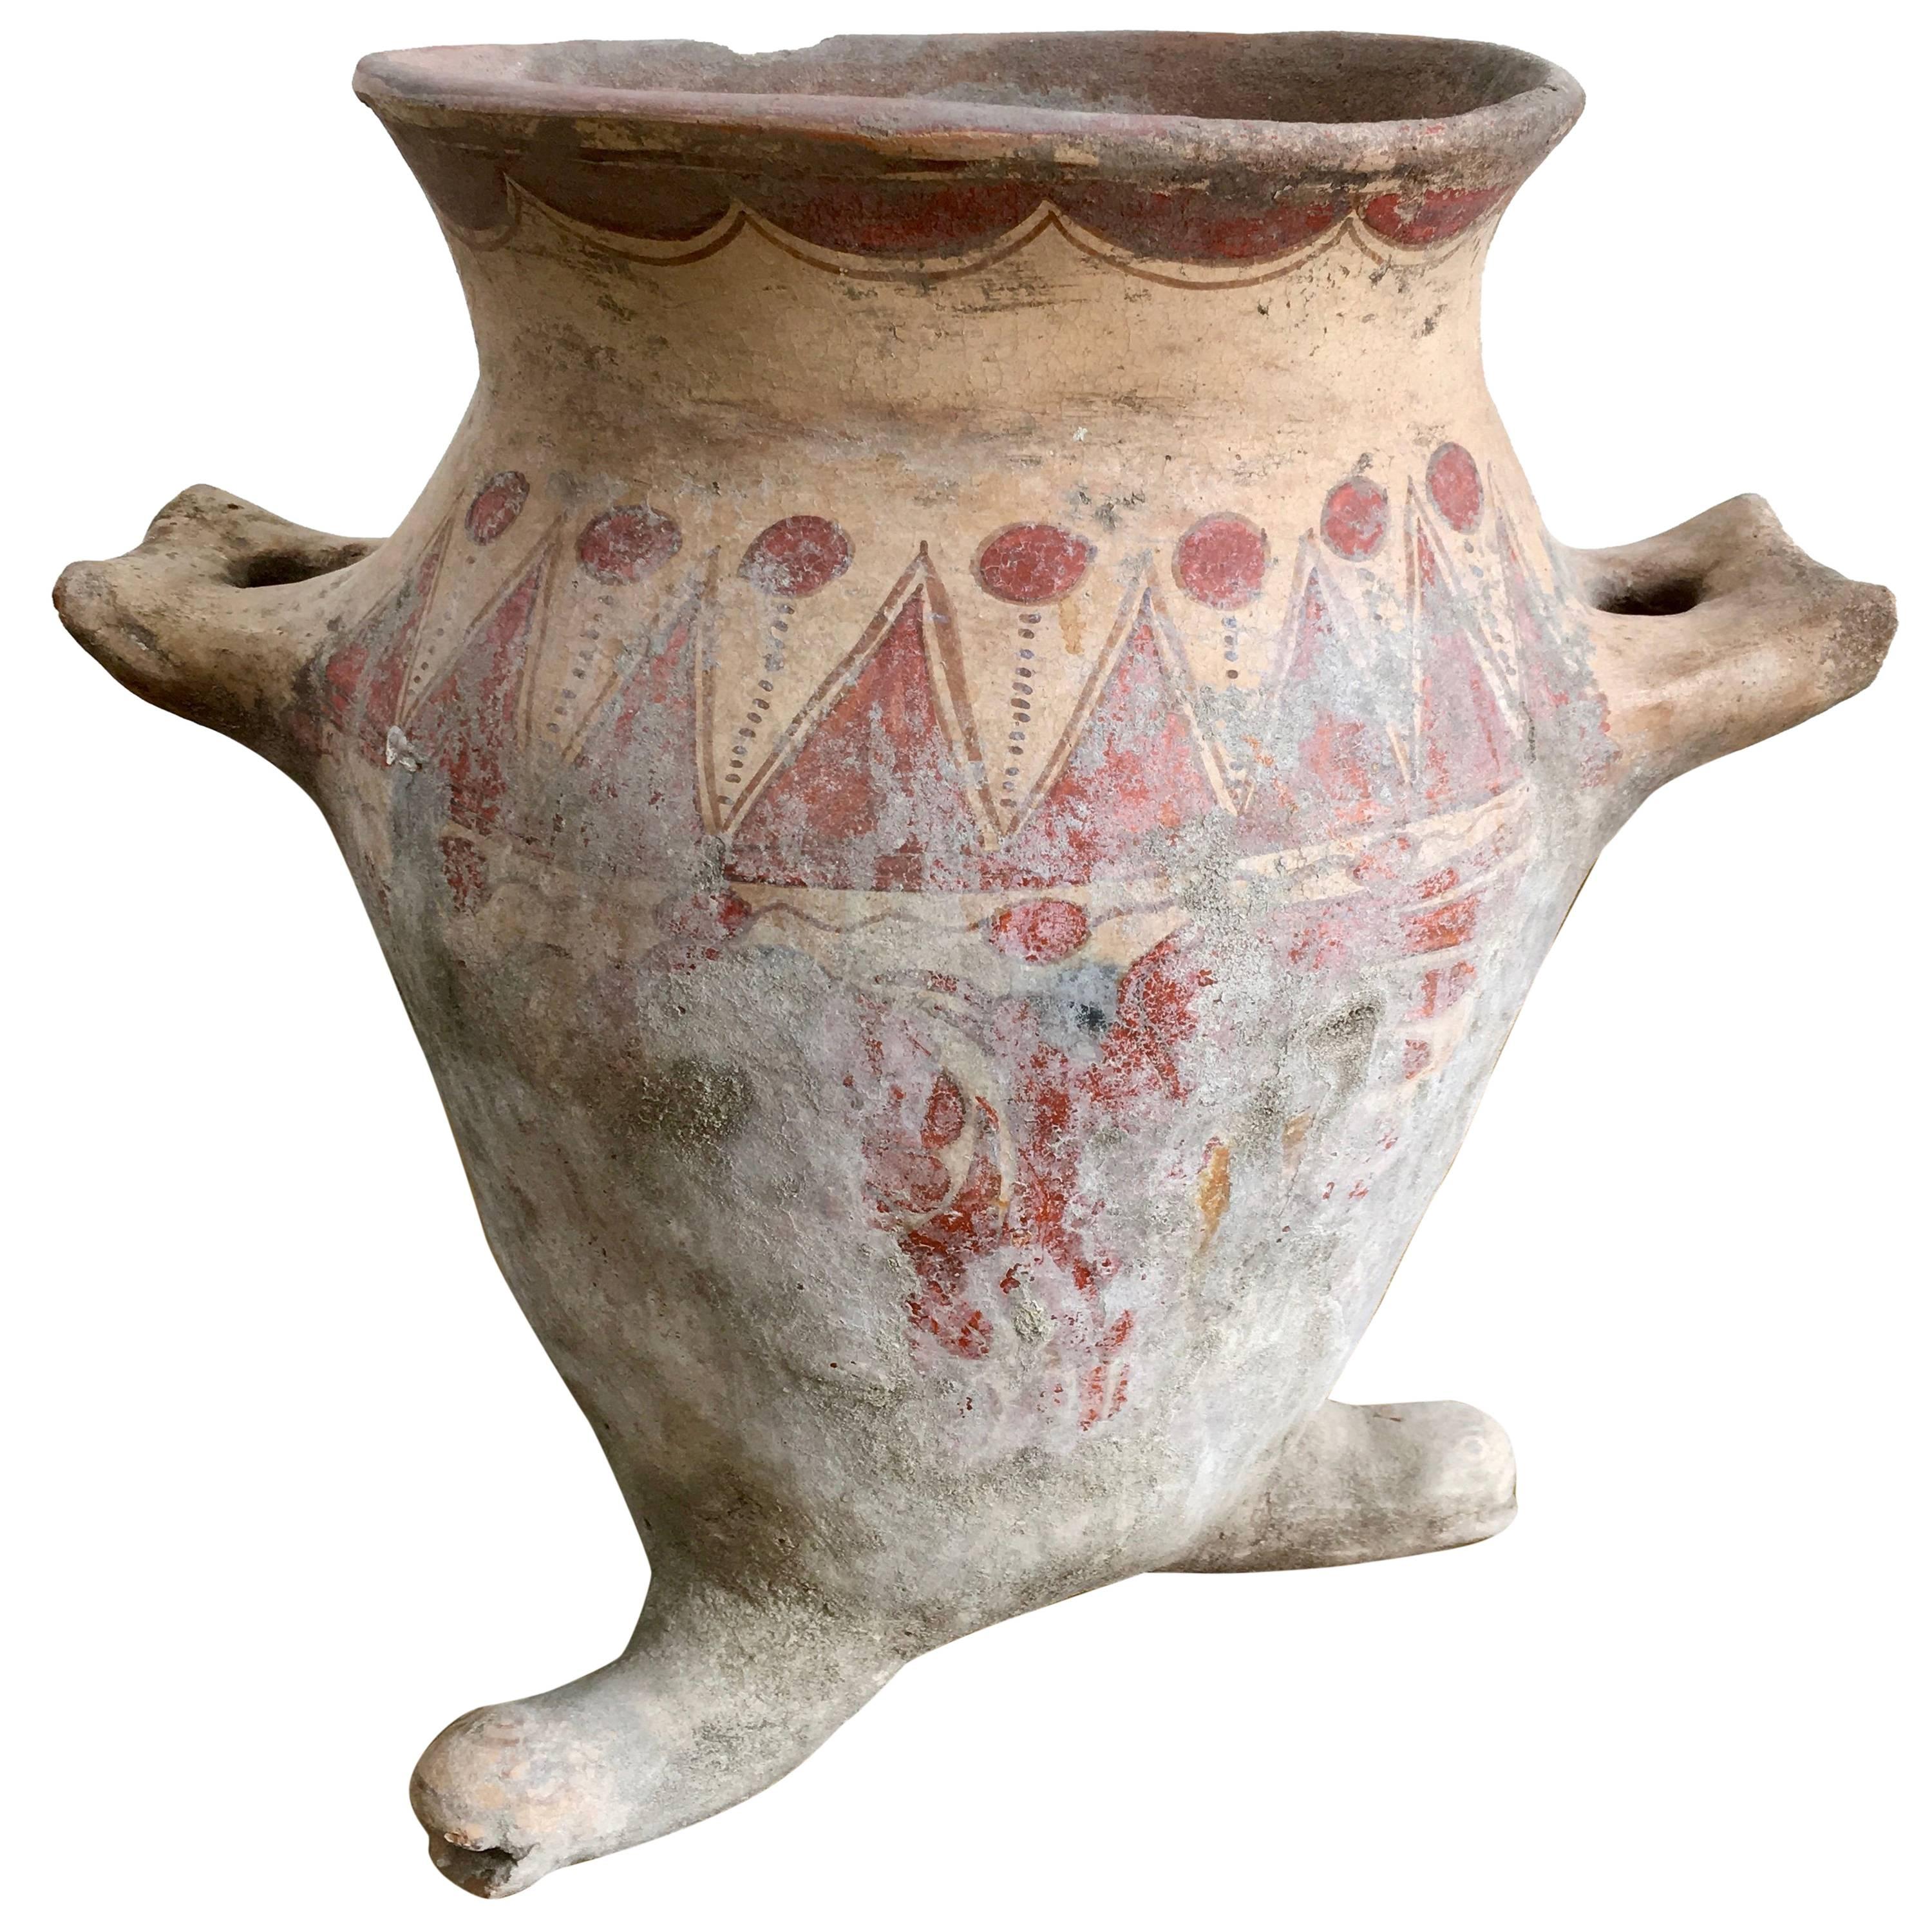 Ceramic Water Vessel from Mexico